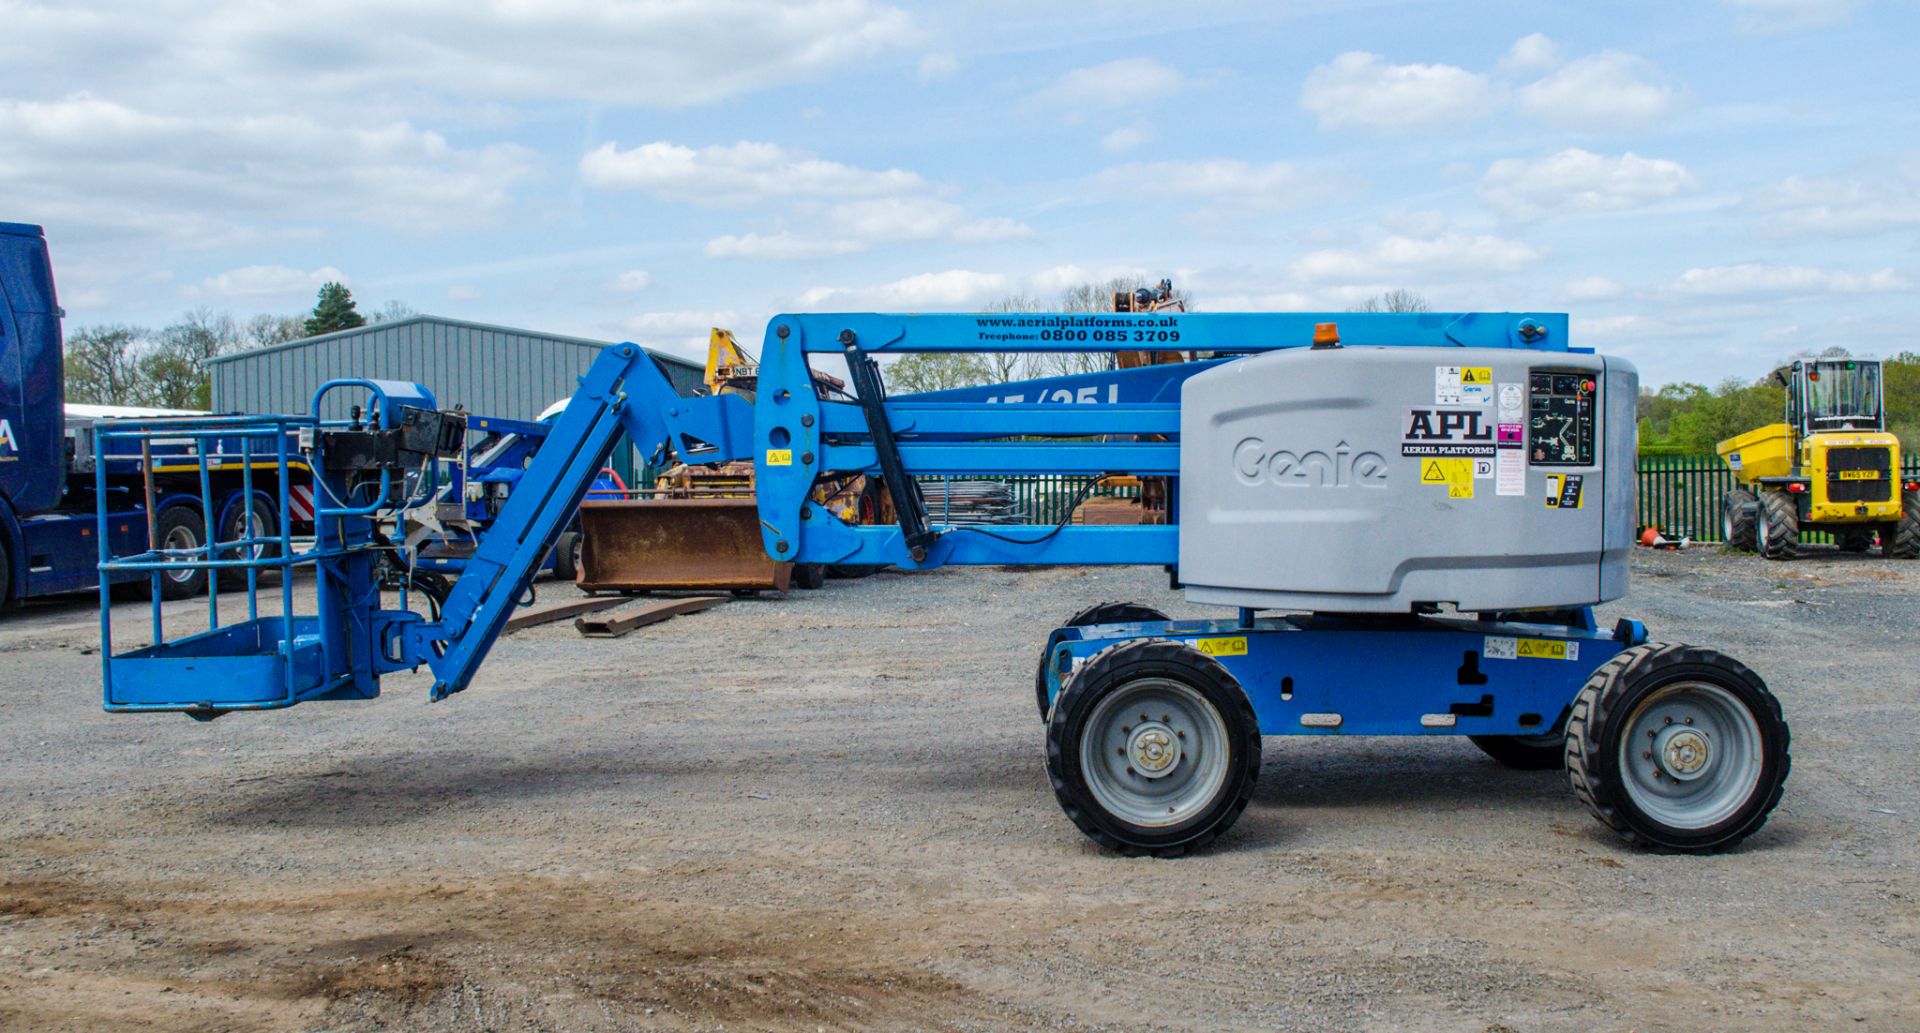 Genie Z-45-125J diesel driven articulated boom access platform Year: 2016 S/N: 16M-5566 Recorded - Image 8 of 20